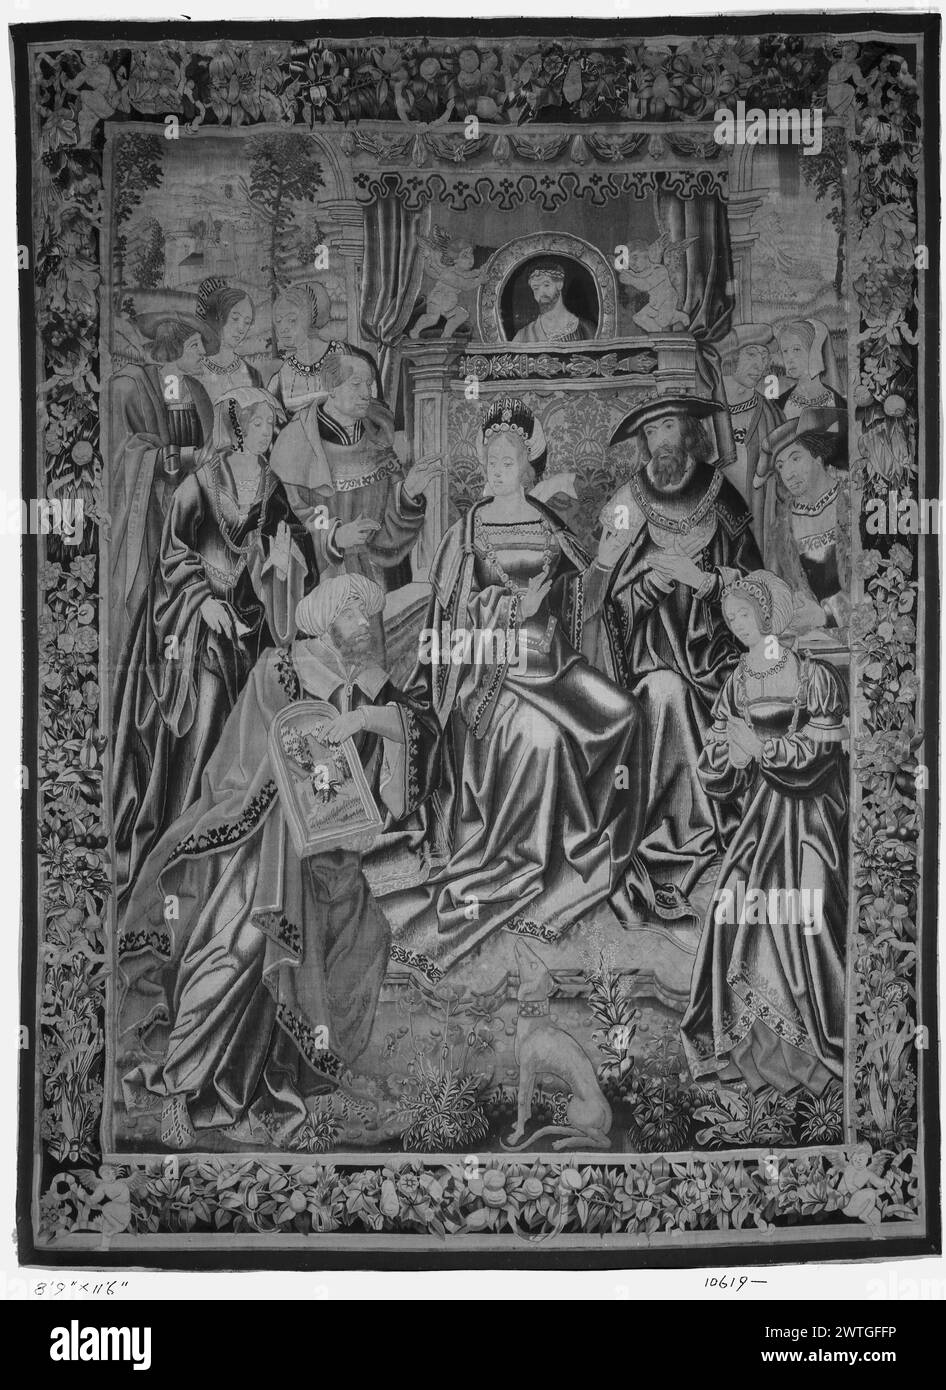 David and Bathsheba: David rebuked by Nathan. unknown c. 1520-1530 Tapestry Dimensions: H 11'6' x W 8'9' Tapestry Materials/Techniques: unknown Culture: Flemish Weaving Center: Brussels Ownership History: French & Co. purchased from A. J. Kobler, invoiced 2/23/1927 (crossed out & replaced with: 3/1/1927); sold to E. W. Hellwig 2/26/1927. In landscape, Nathan, before enthroned David & Bathsheba, holds picture illustrating his parable (rich man takes poor man's lamb to prepare it for his guest), & accuses David of his misdeed (2 Samuel 11-12); above throne, medallion portrait of David as young m Stock Photo